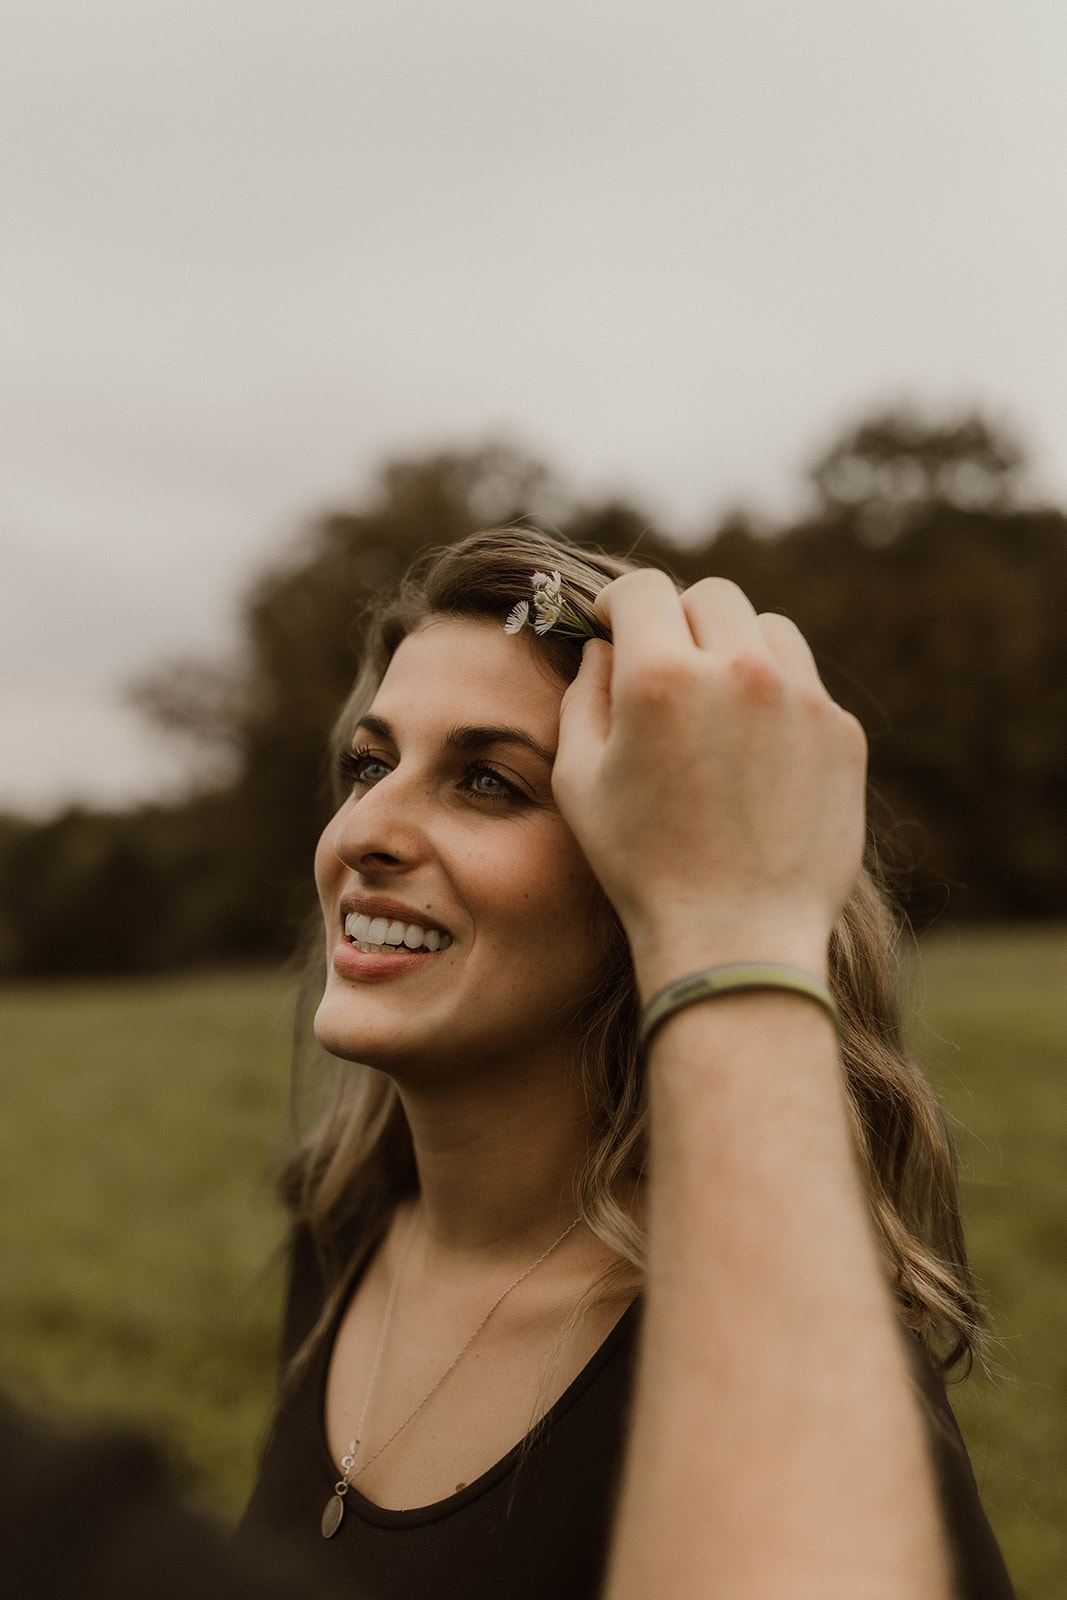 Stunning lady gets a wildflower gently placed behind her ear 